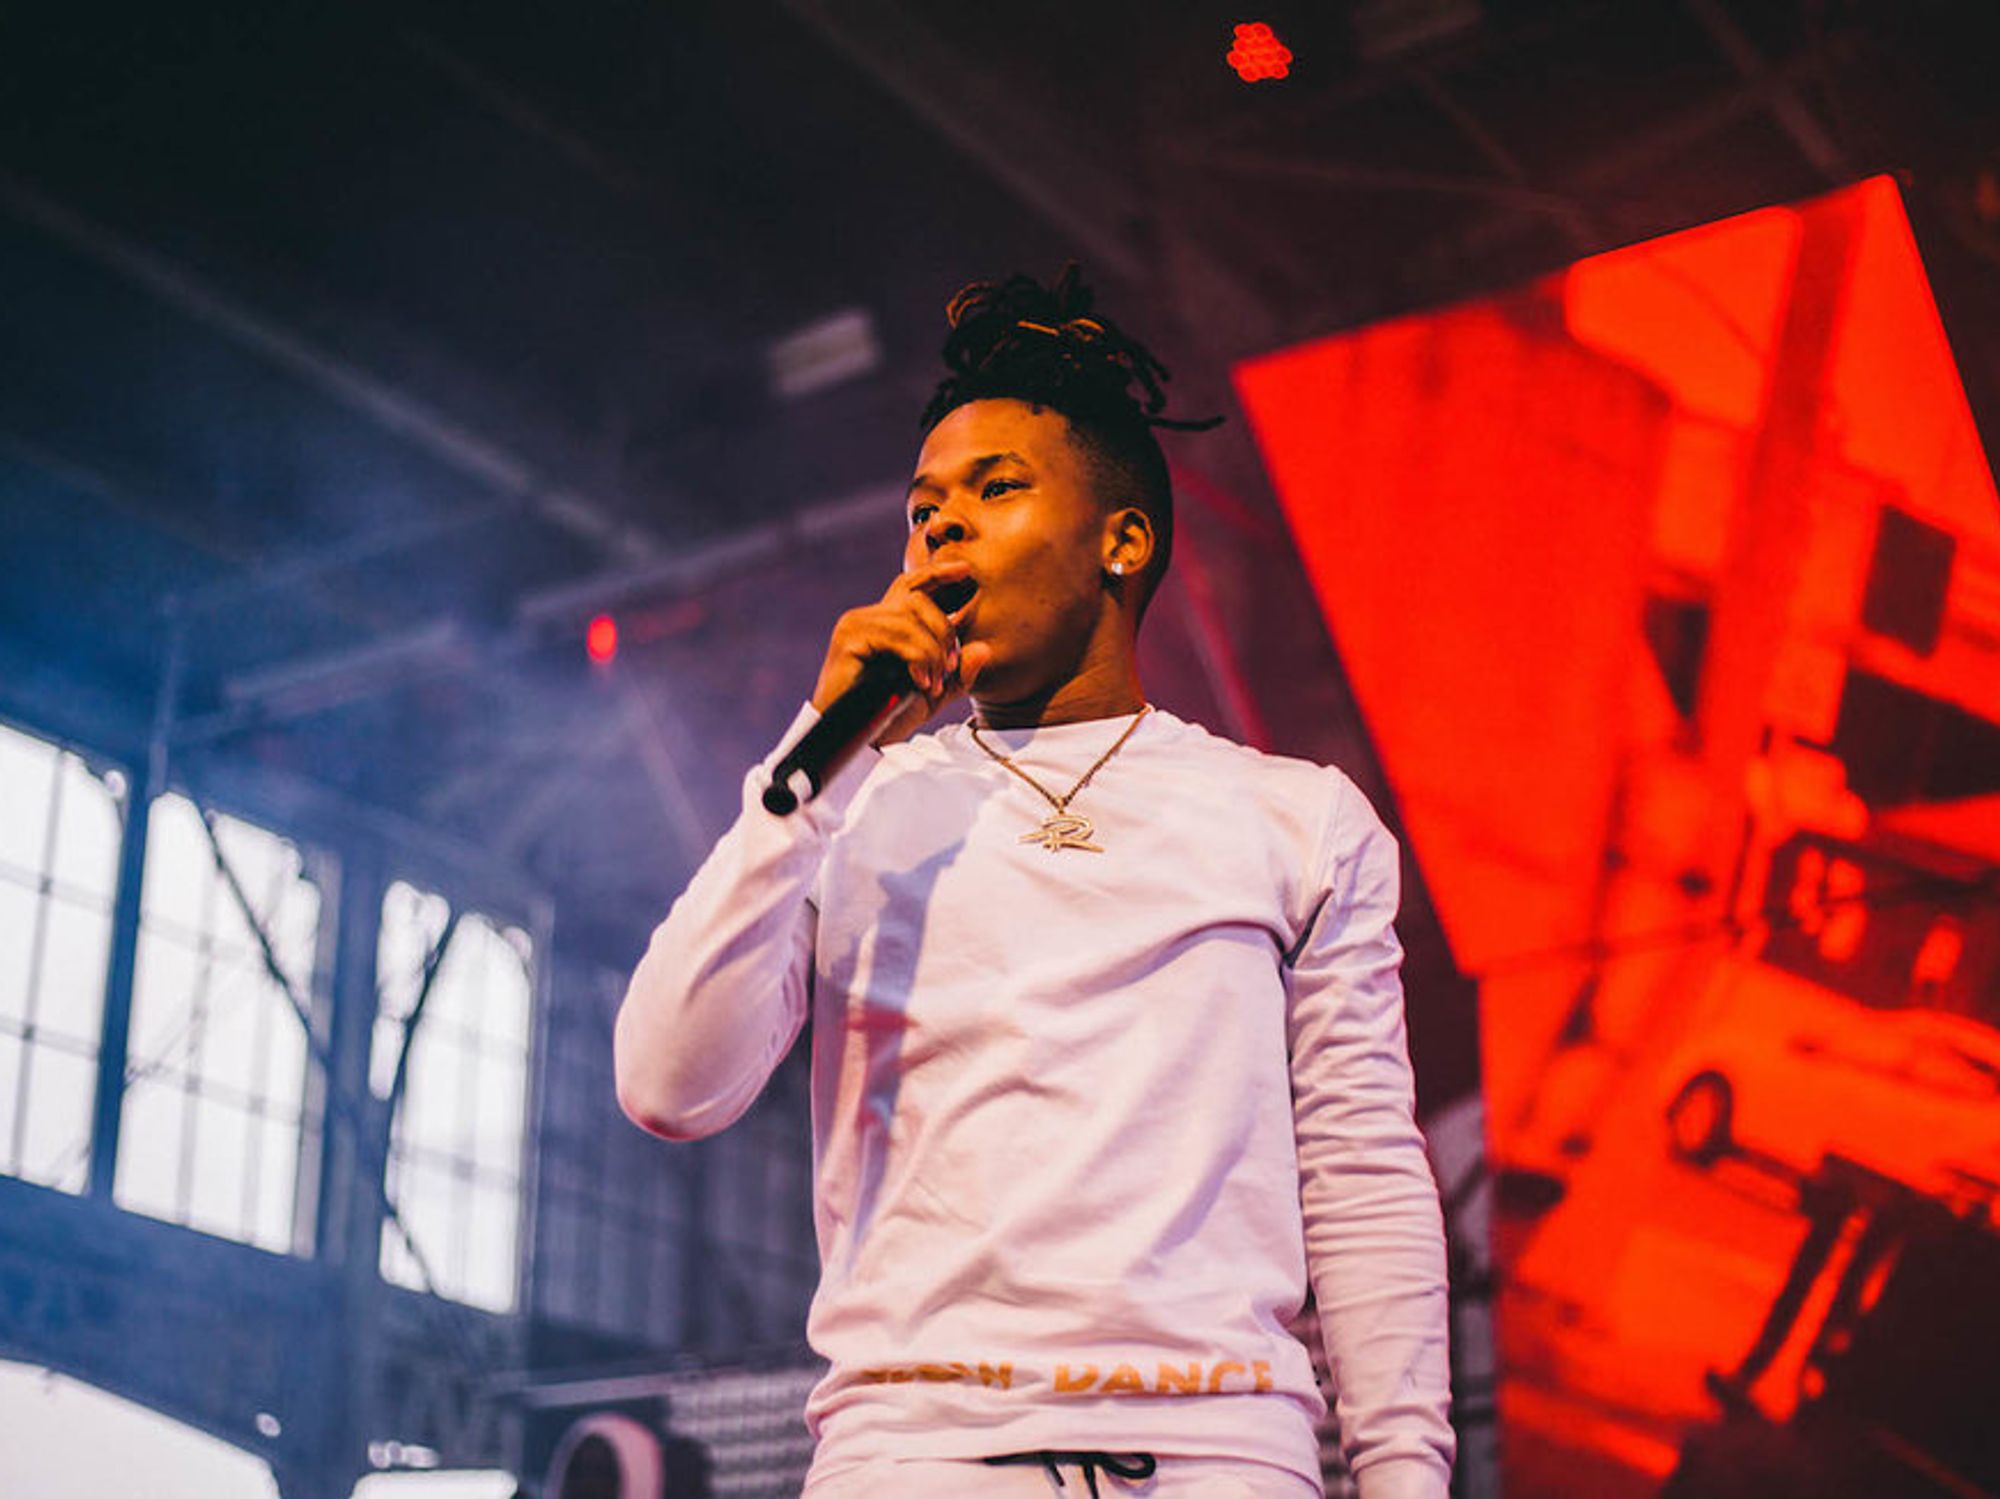 Nasty C holding a microphone and dressed in all white. 